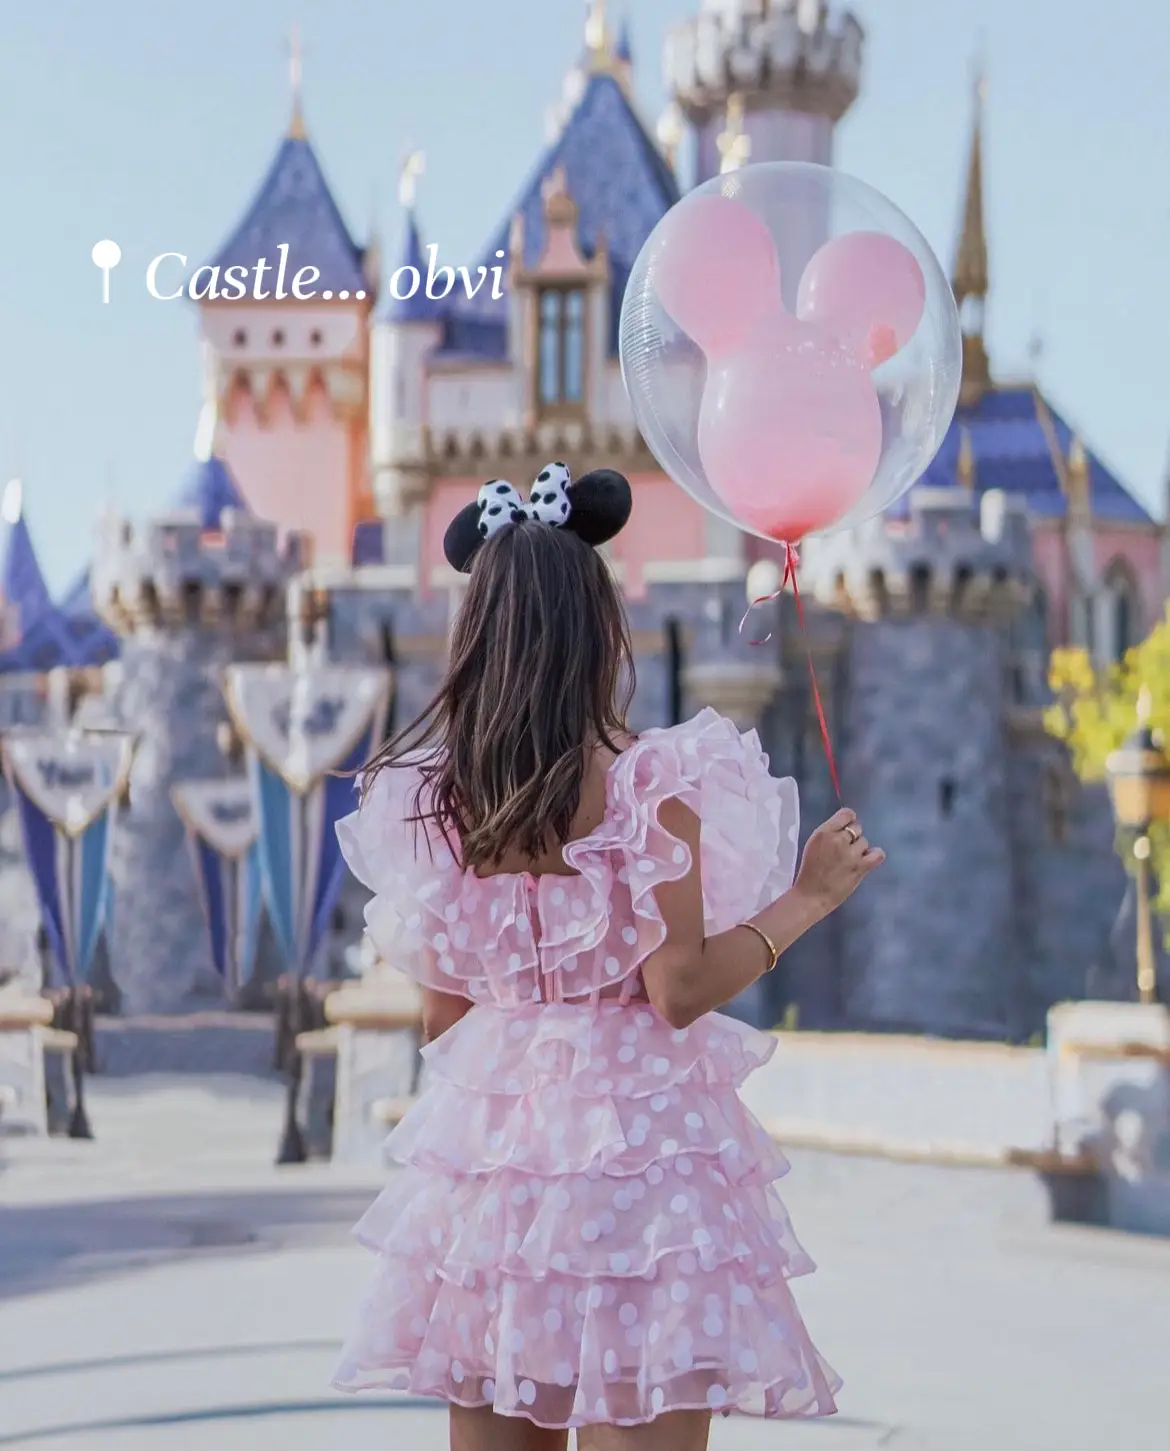  A little girl wearing a pink dress is holding a red balloon.